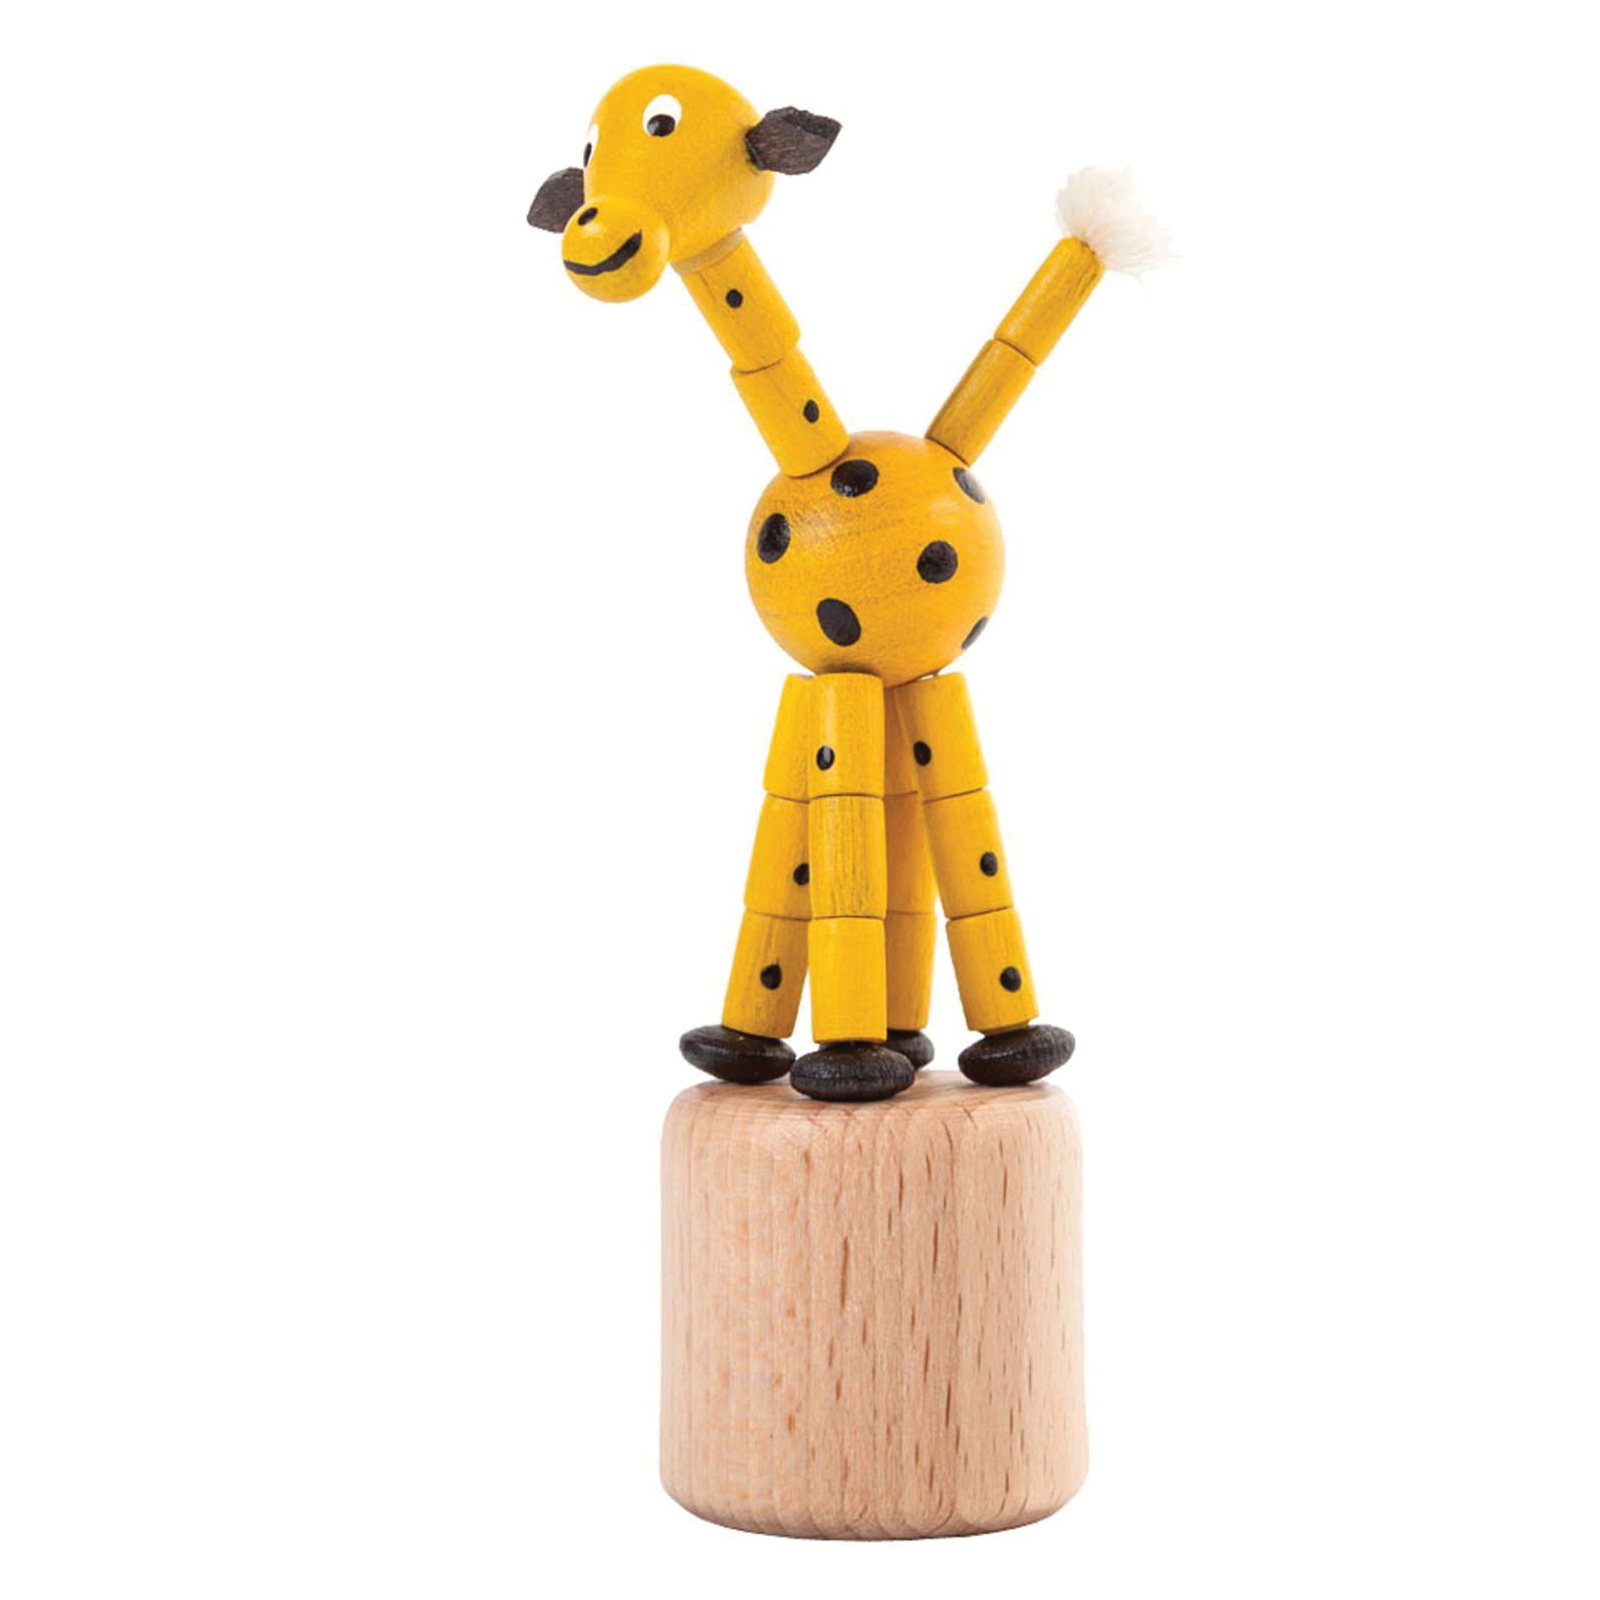 Giraffe Baby Thermometer, Bathtub Pool Floating Toy Thermometer